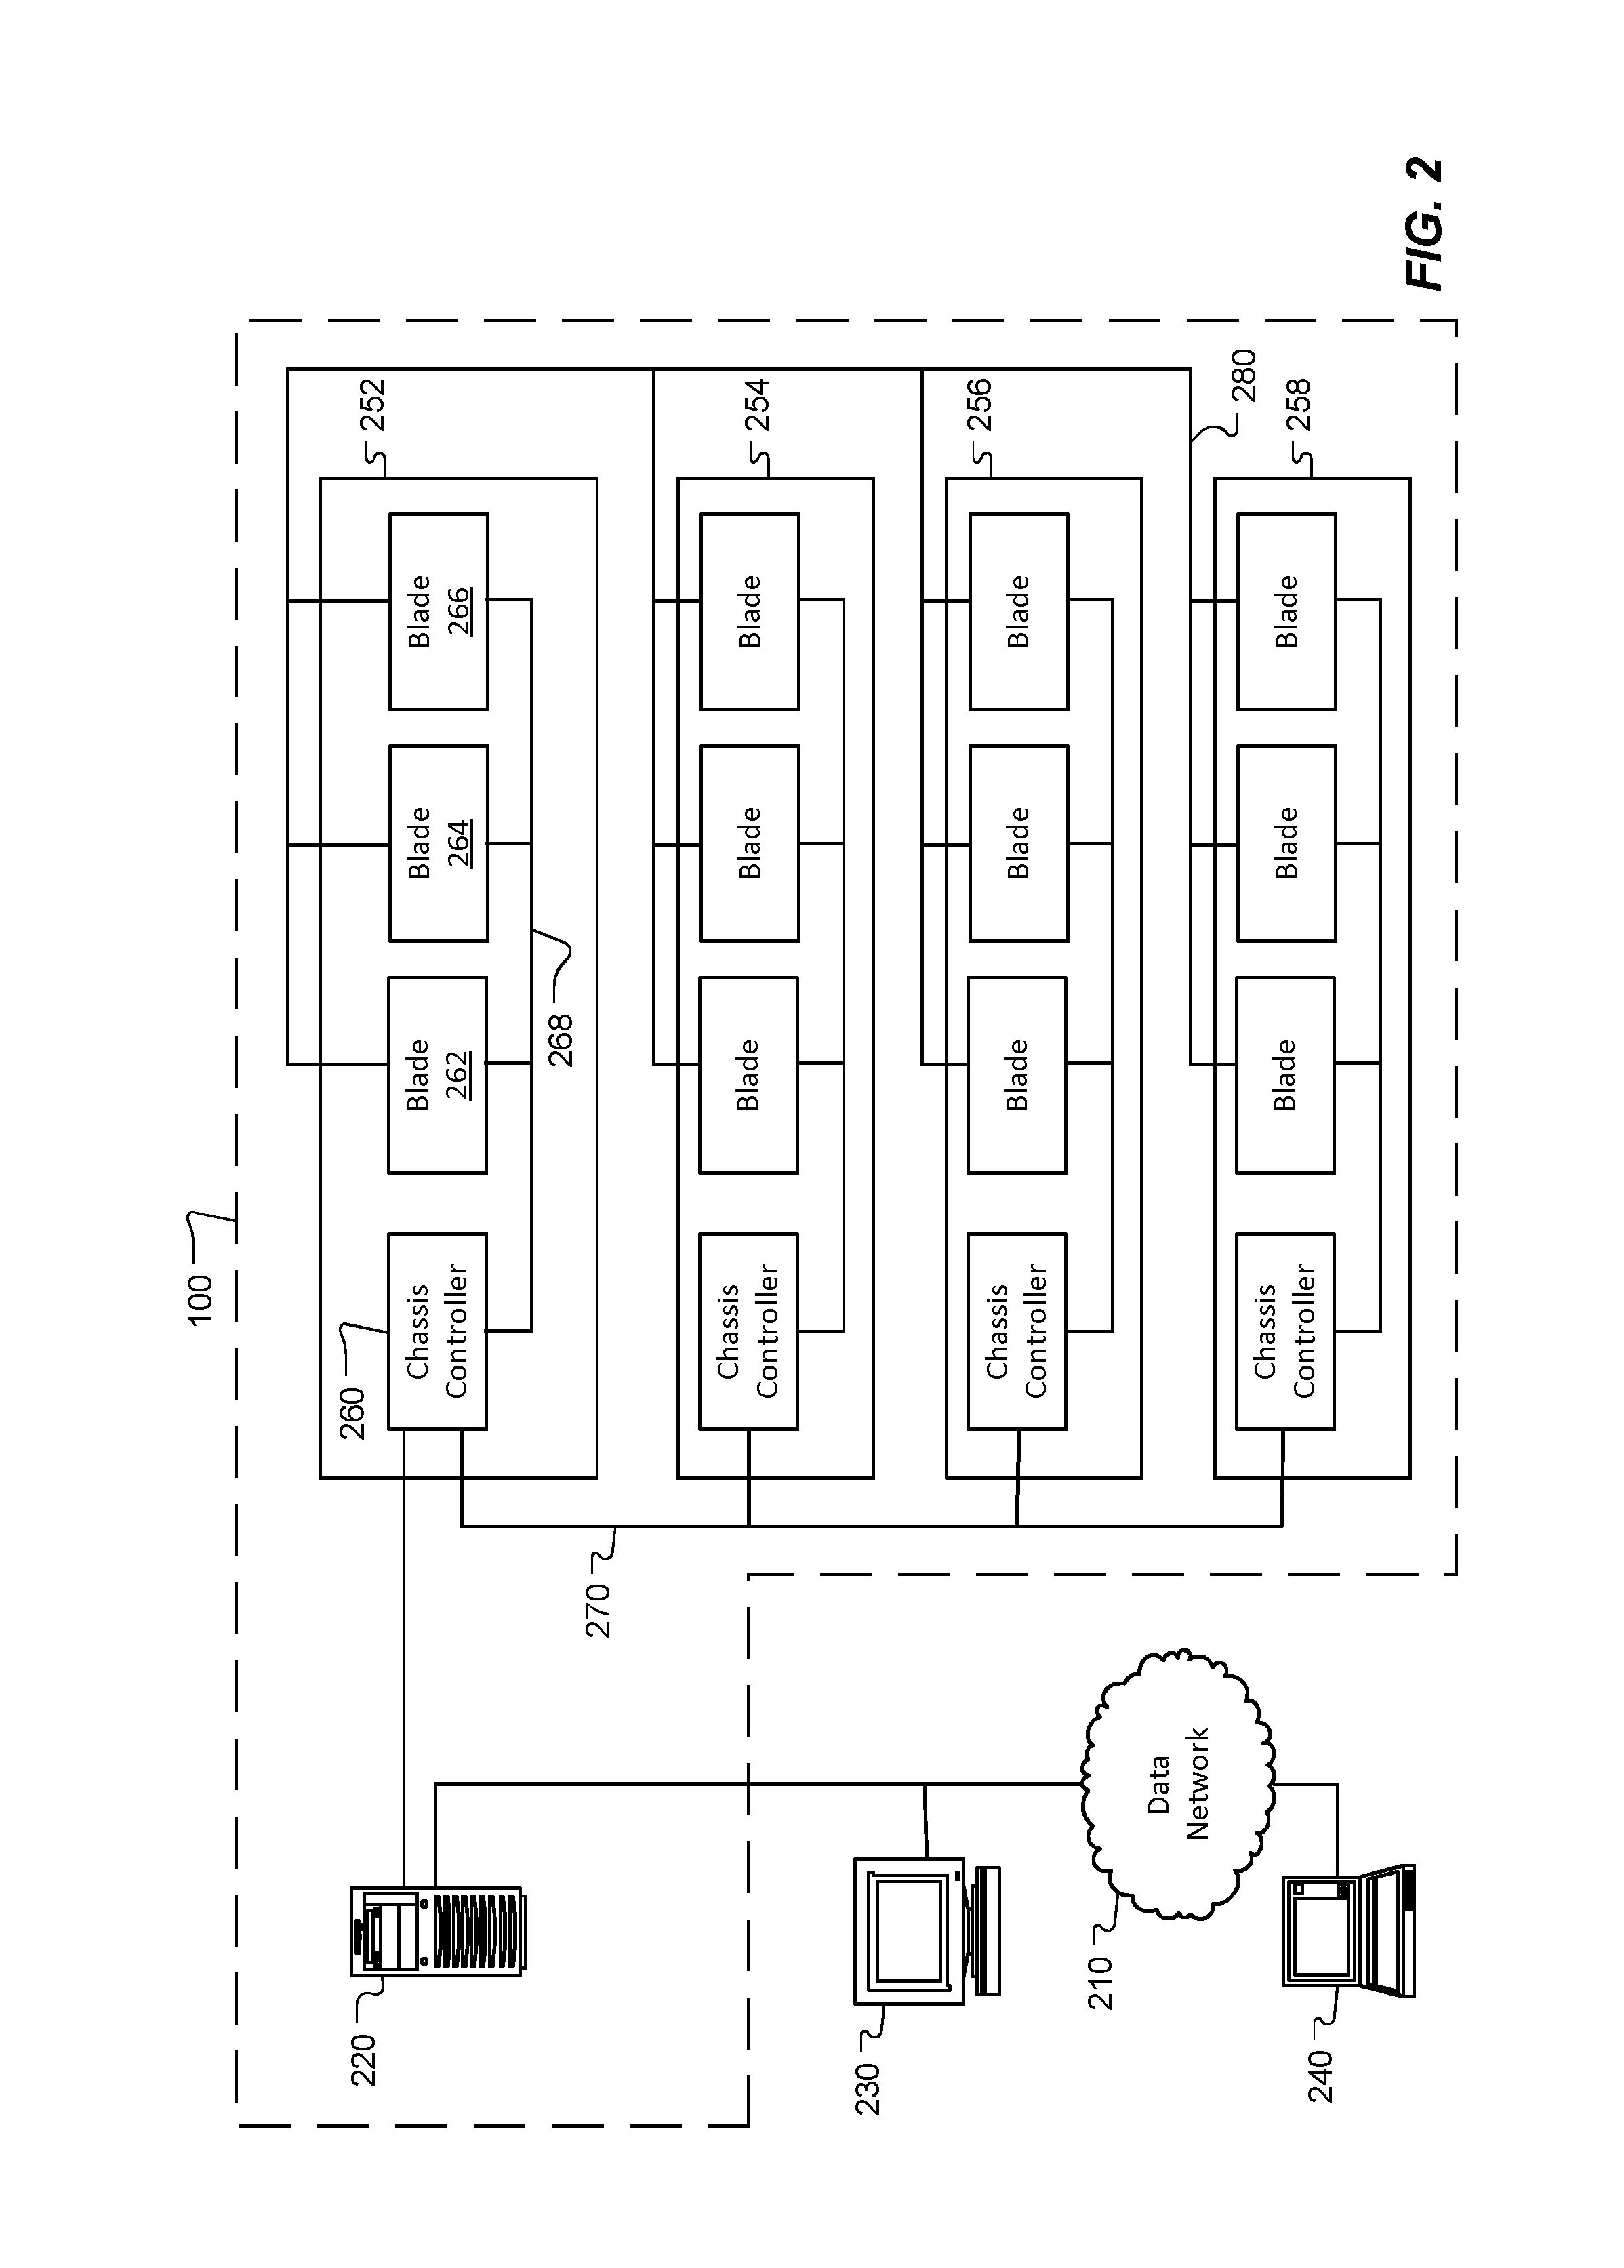 Global synchronous clock circuit and method for blade processors